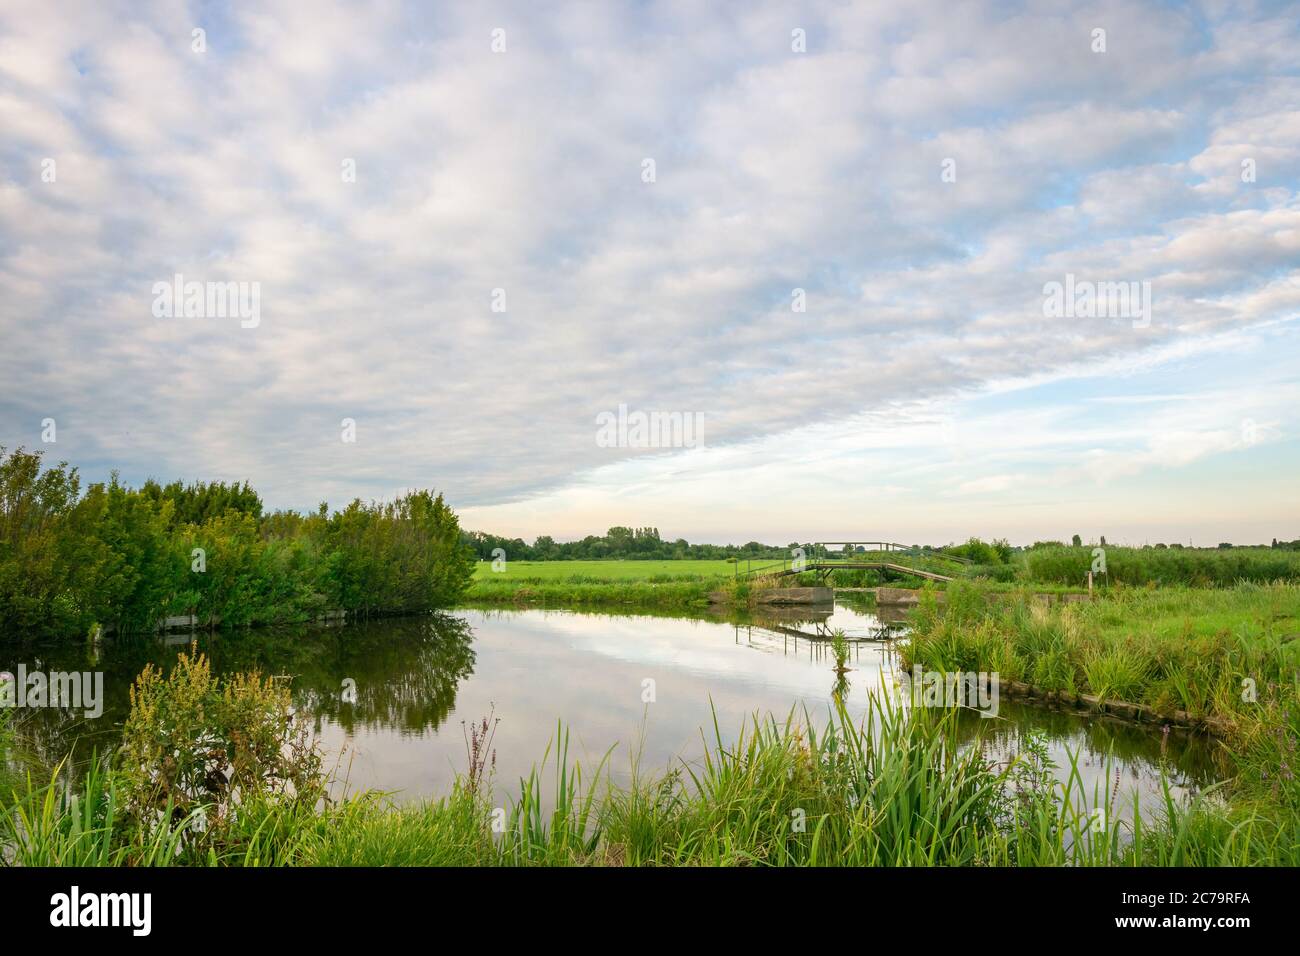 Polder landscape in western part of Holland. Green meadows are intersected with ditches or canals, where the watersides are connected by small bridges. Stock Photo